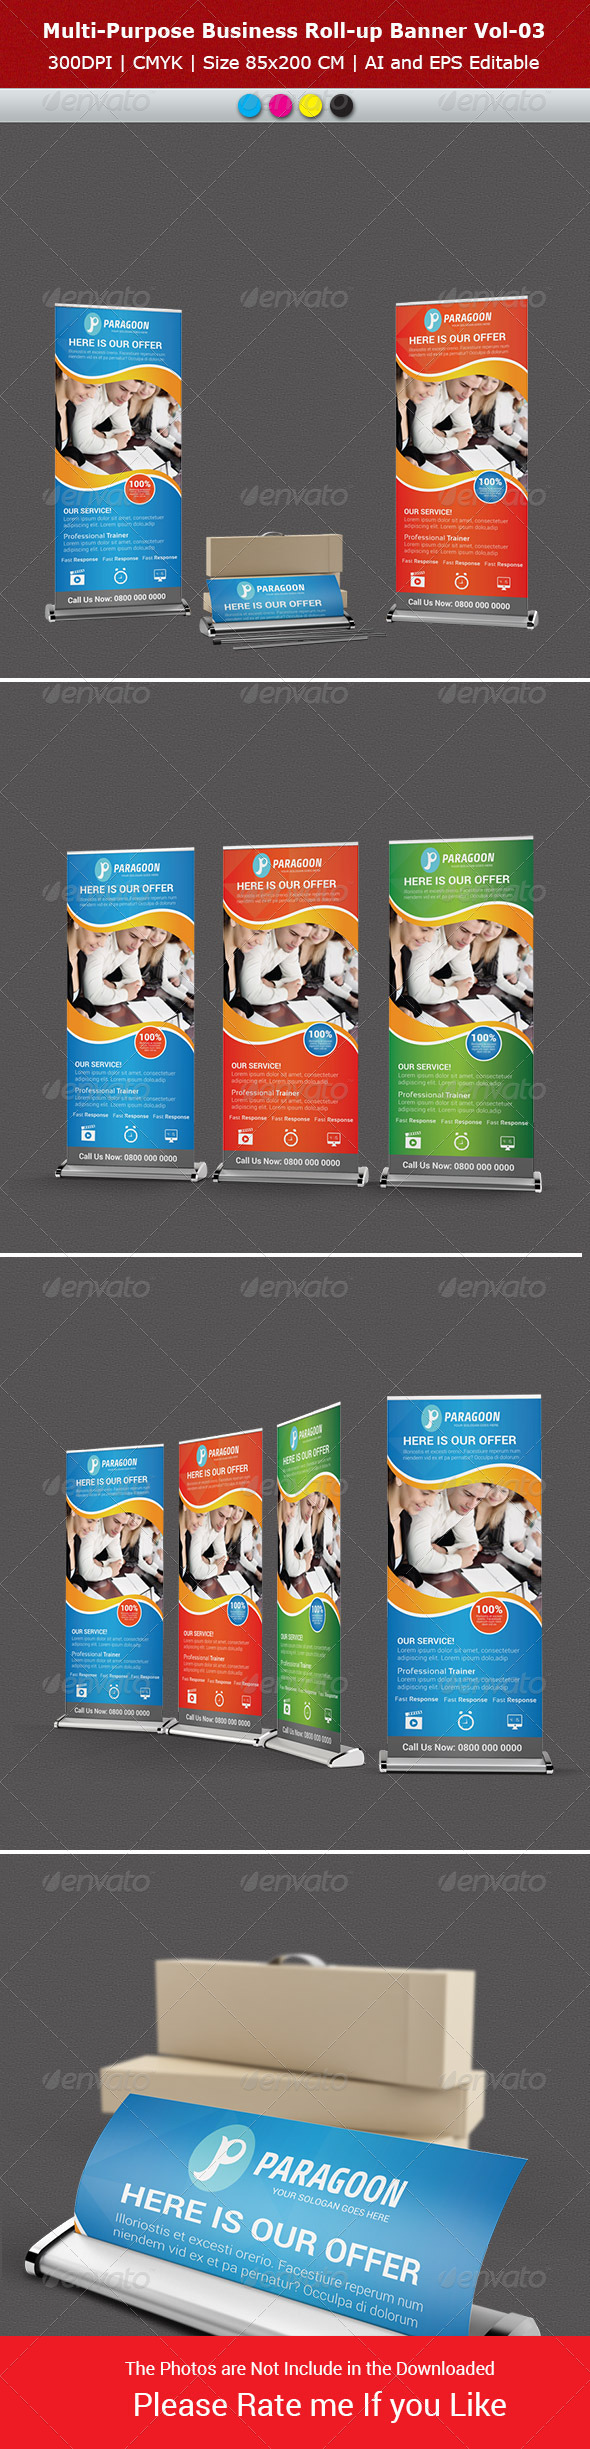 GraphicRiver Multipurpose Business Roll-Up Banner Vol-03 7638753